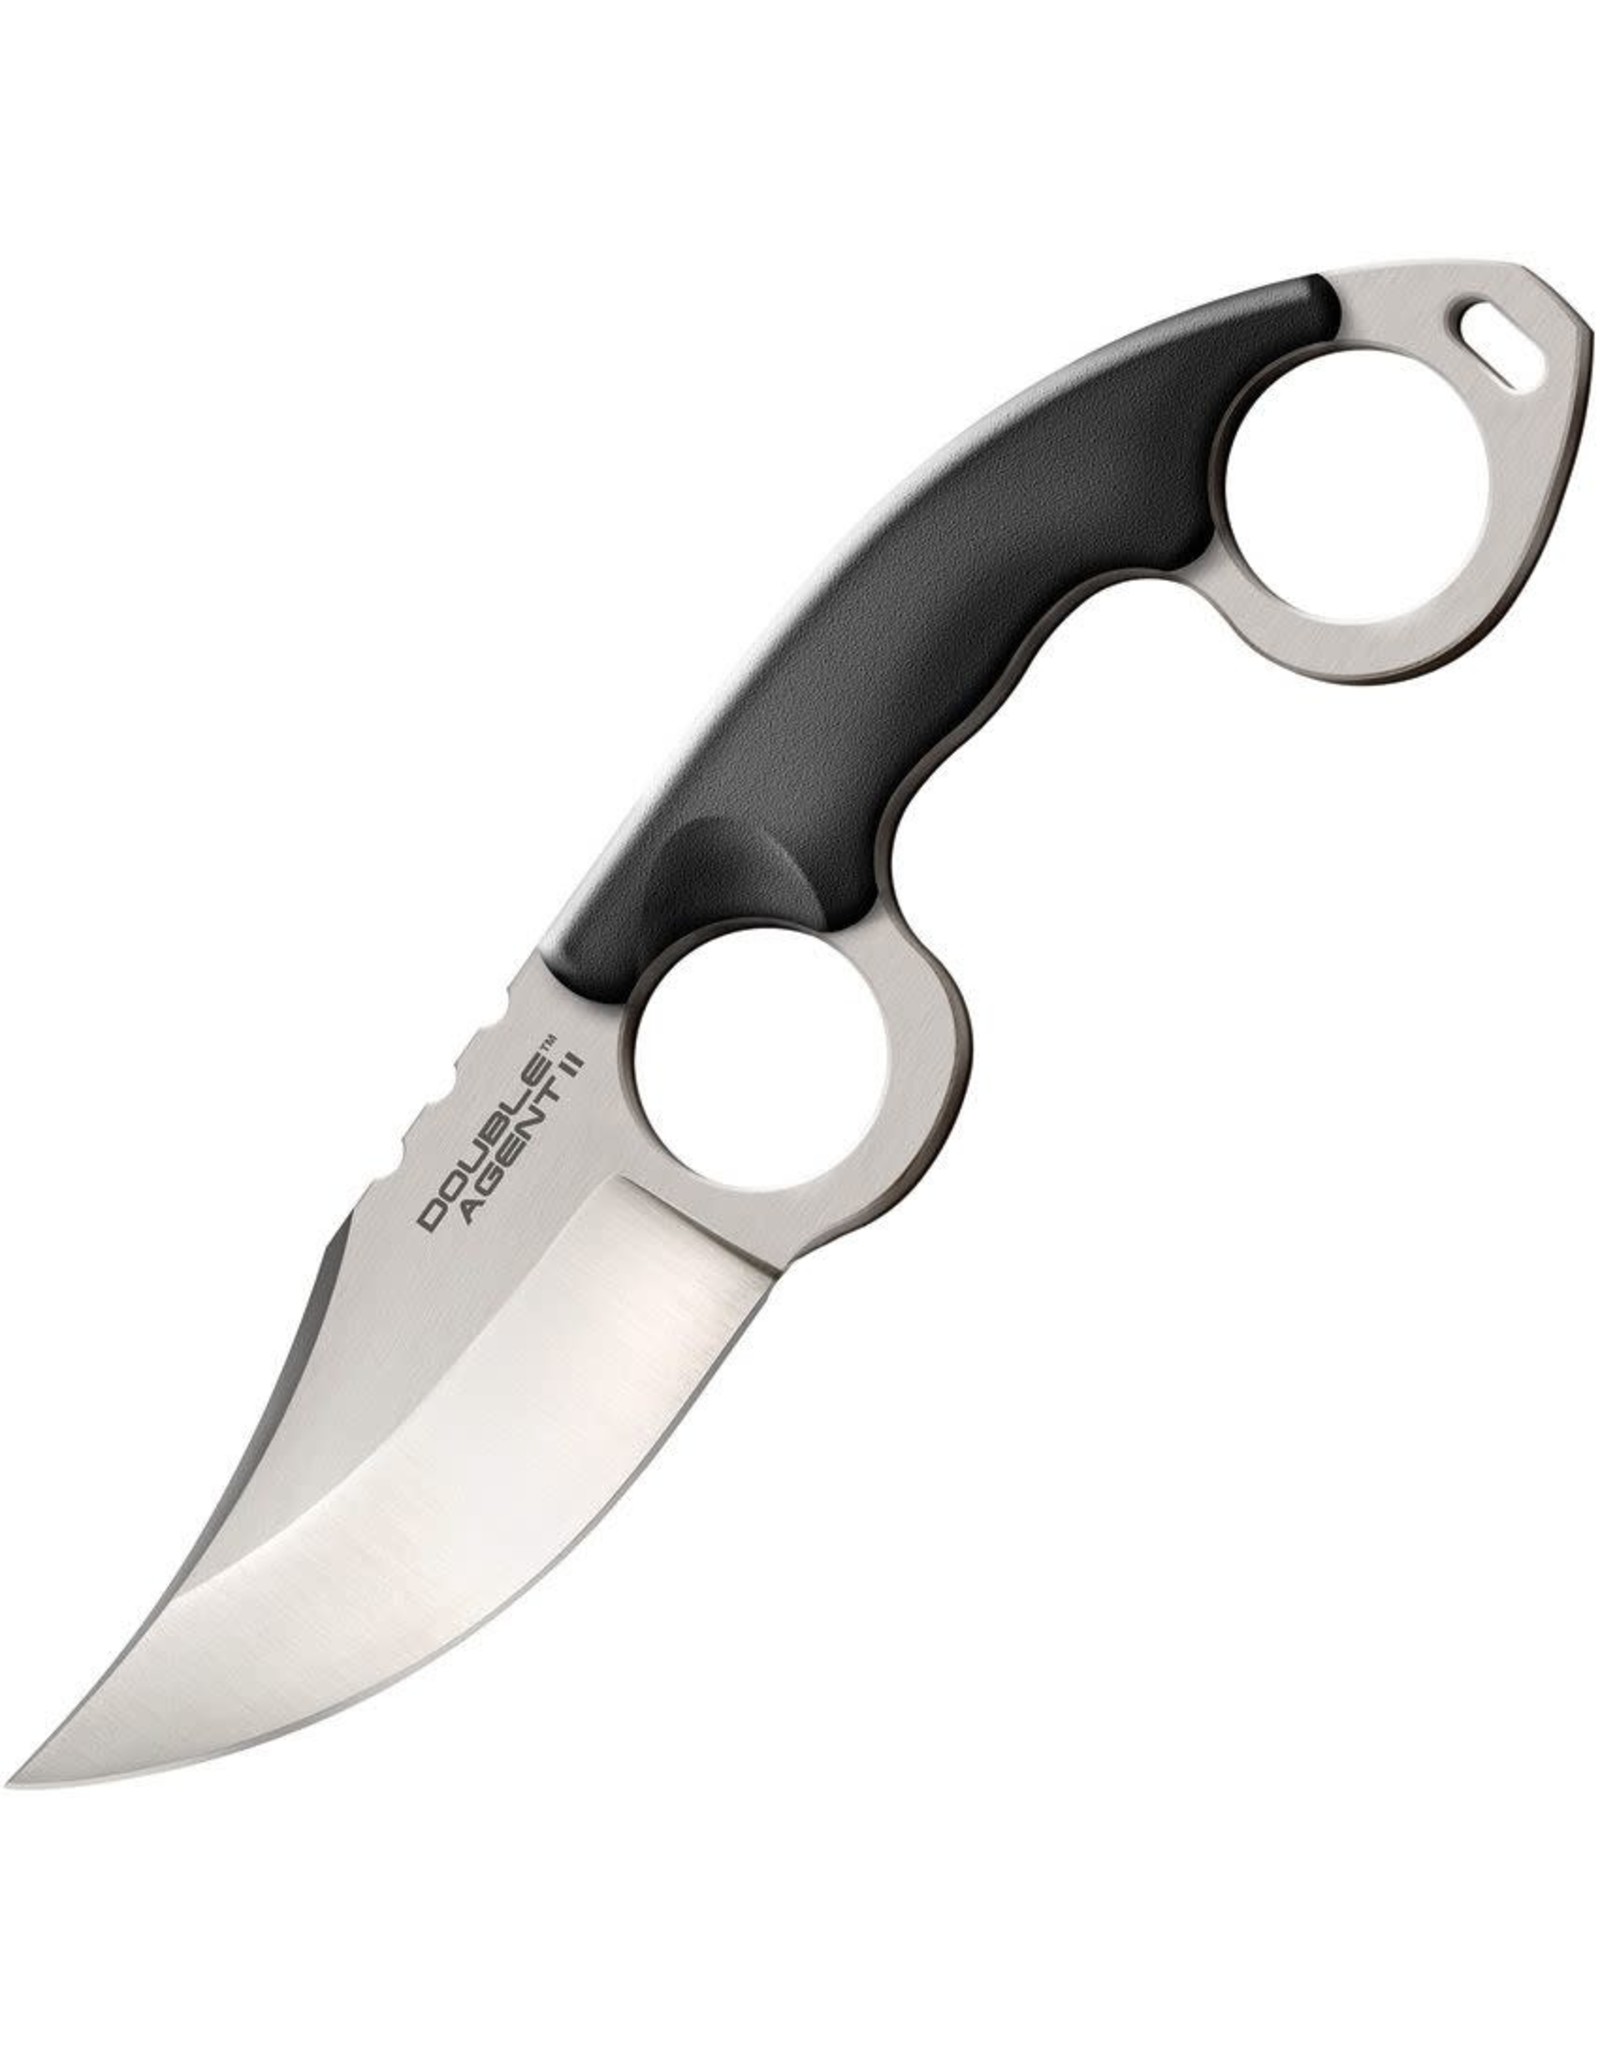 Cold Steel Cold Steel - Double Agent